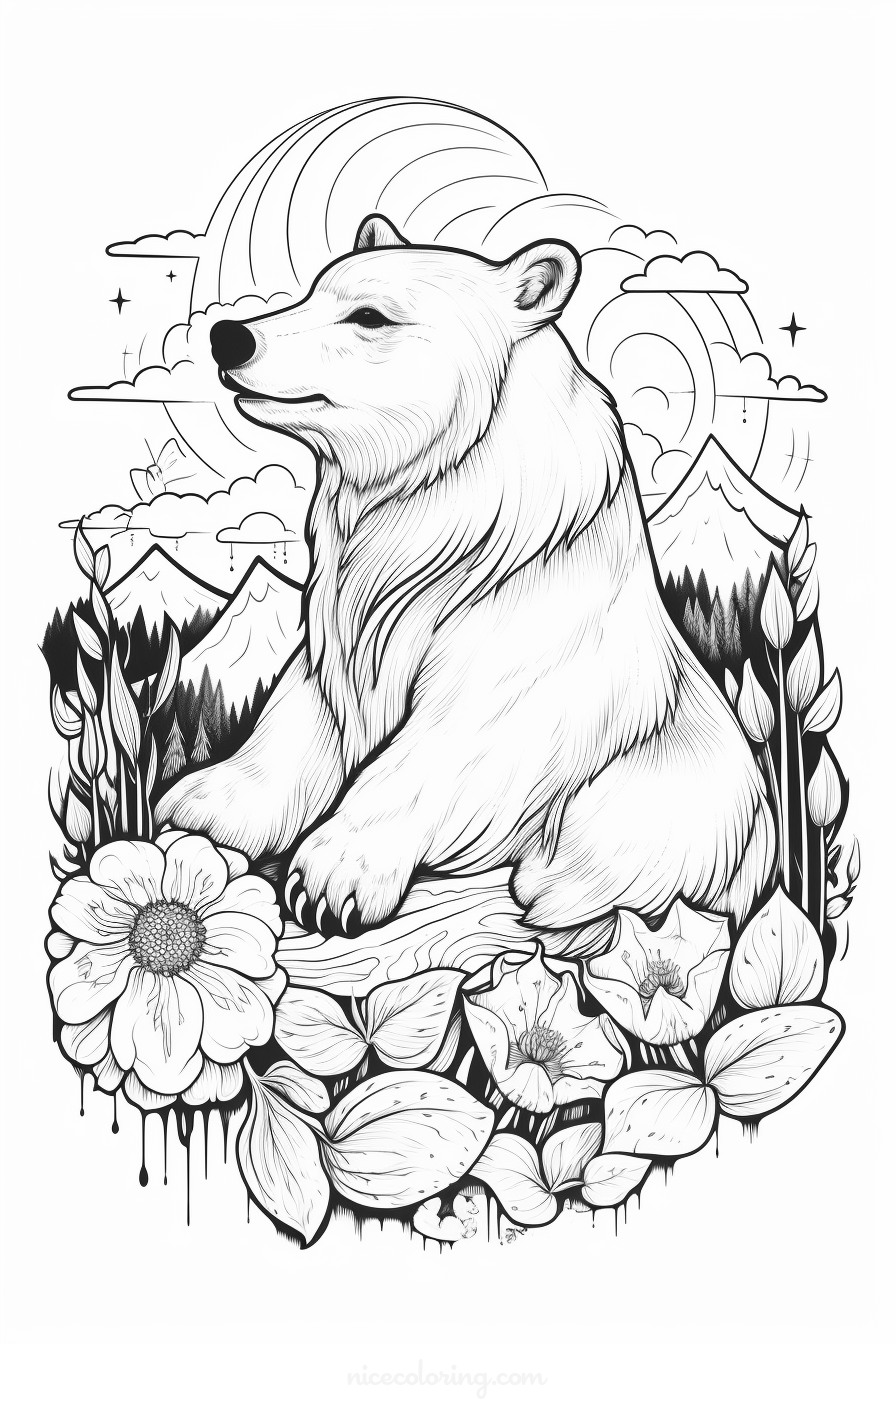 Bear family in the forest coloring page